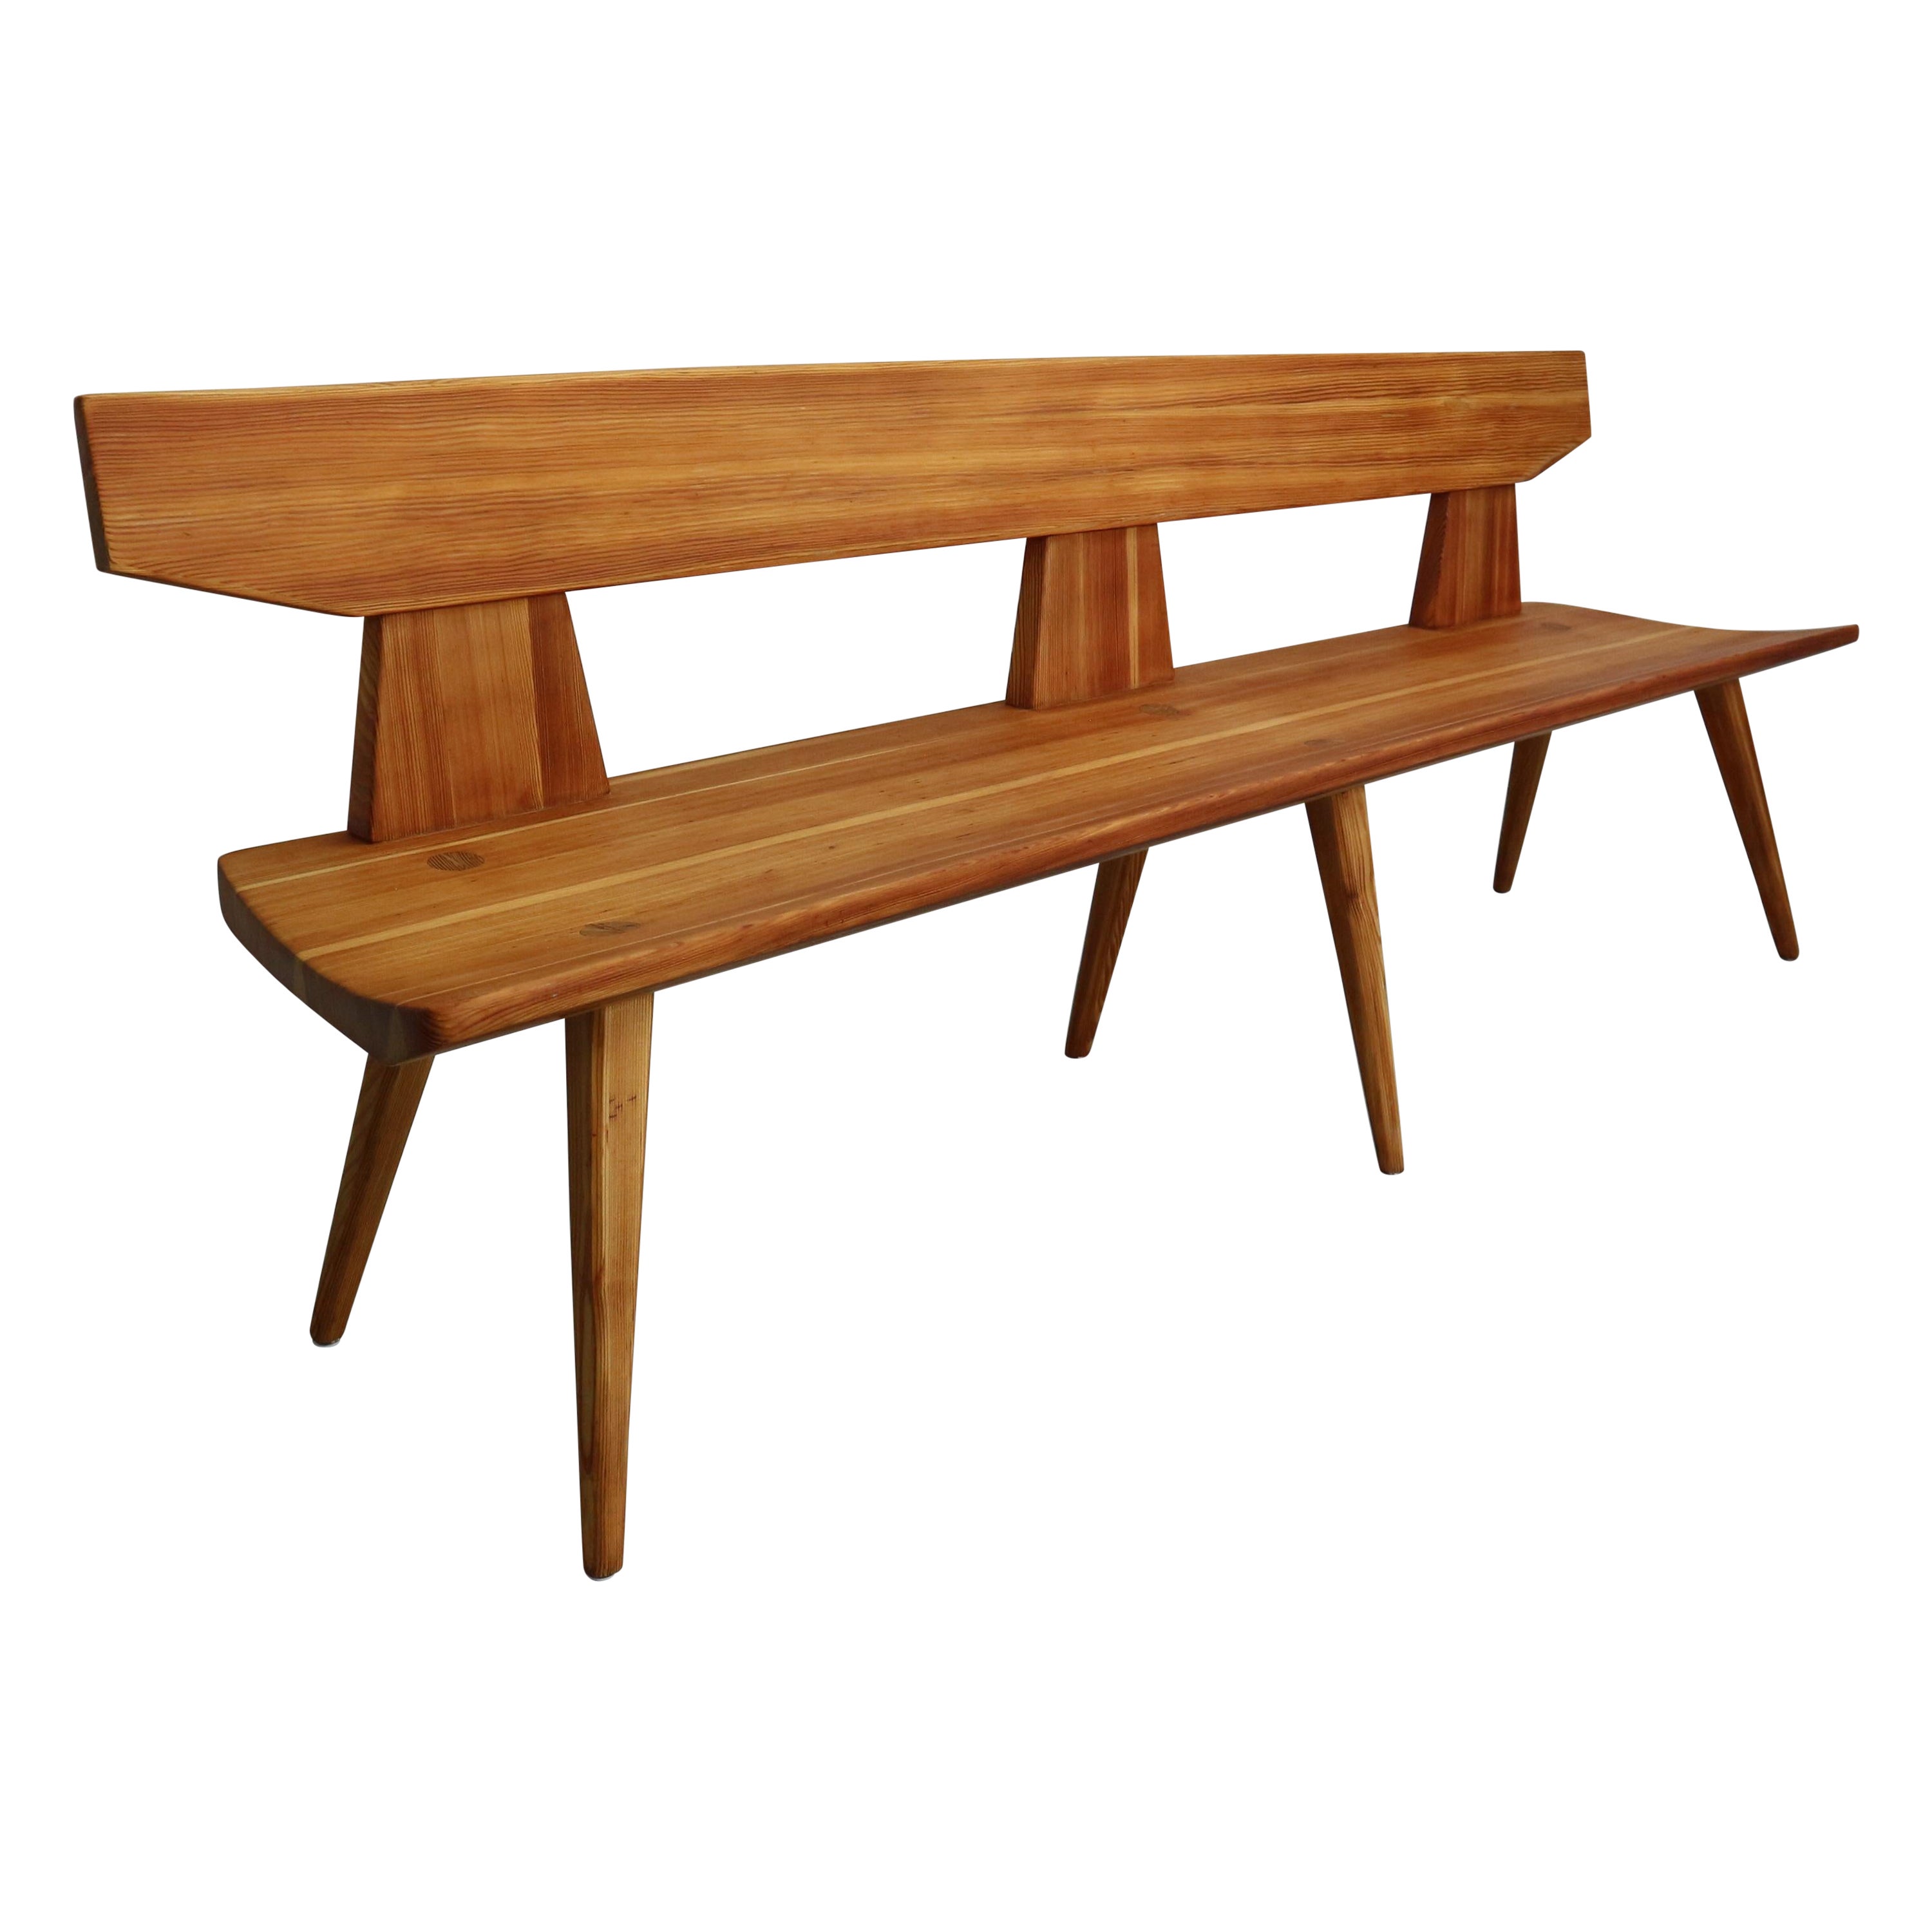 Jacob Kielland Brandt Bench in Pine Wood for Christiansen, Handcrafted, 1960s